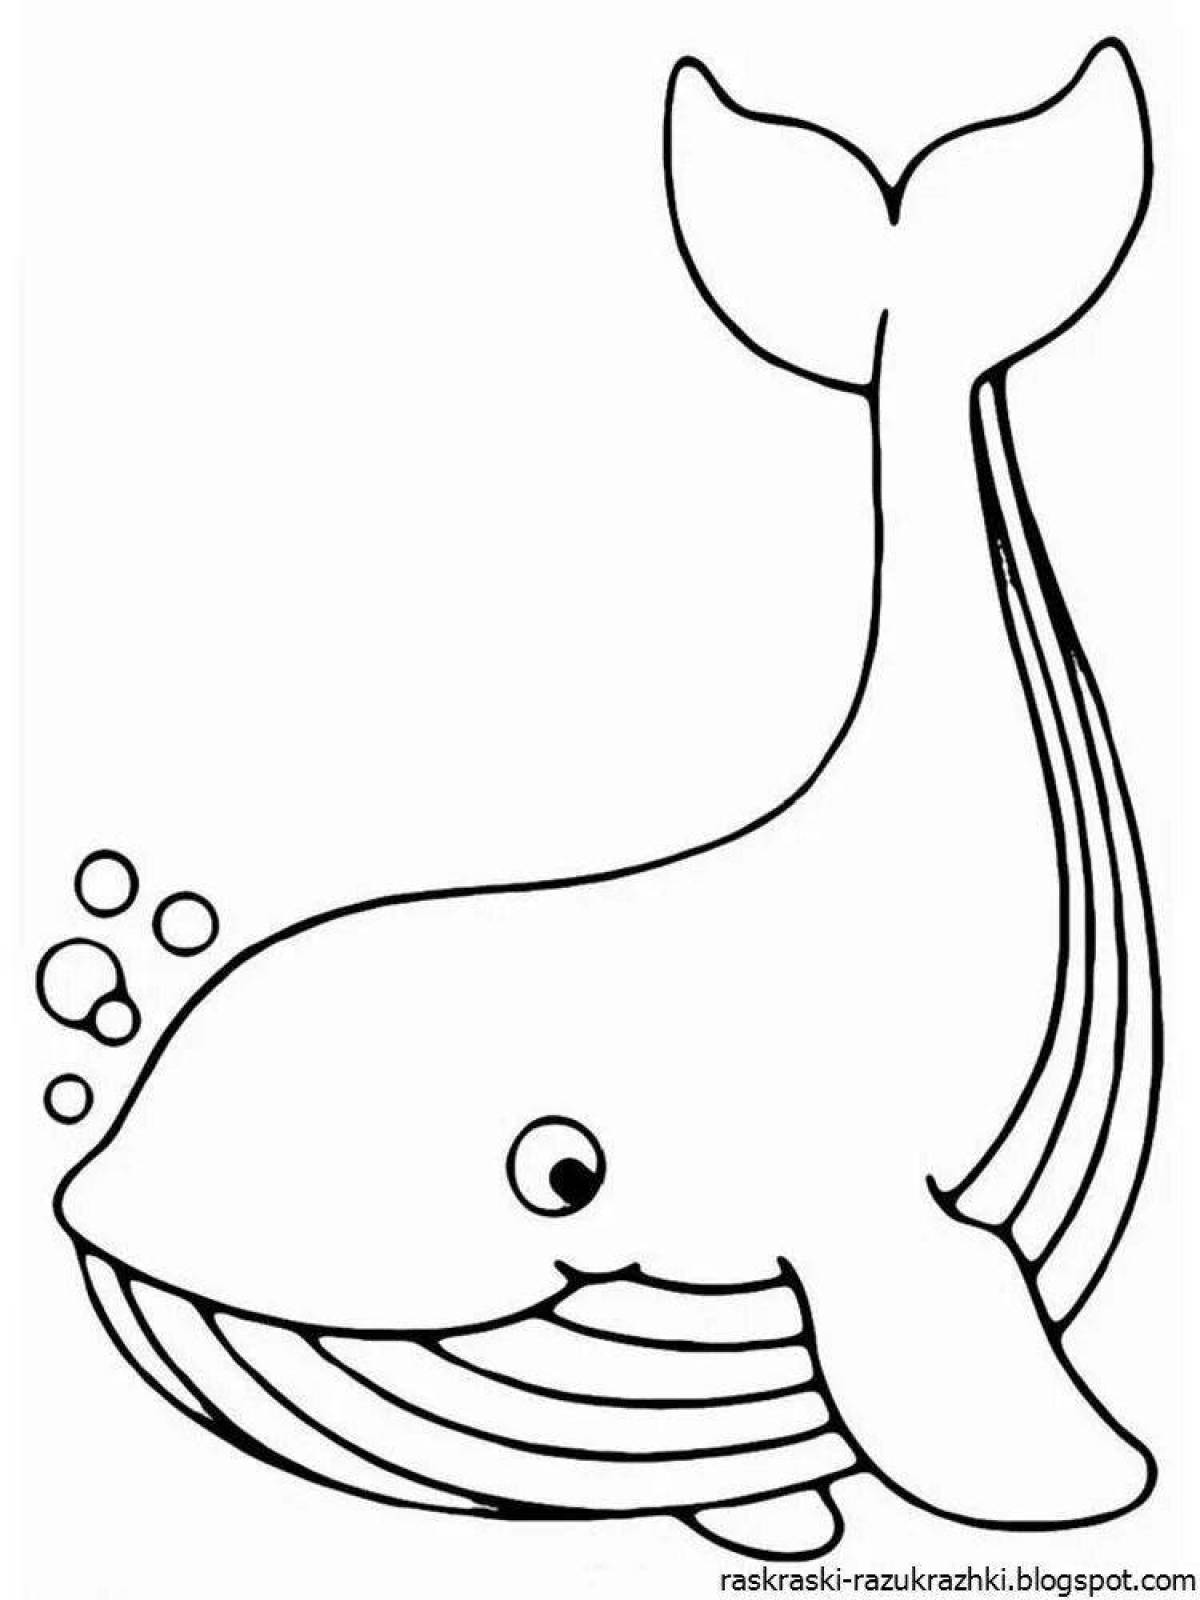 Fun coloring book with whales for kids